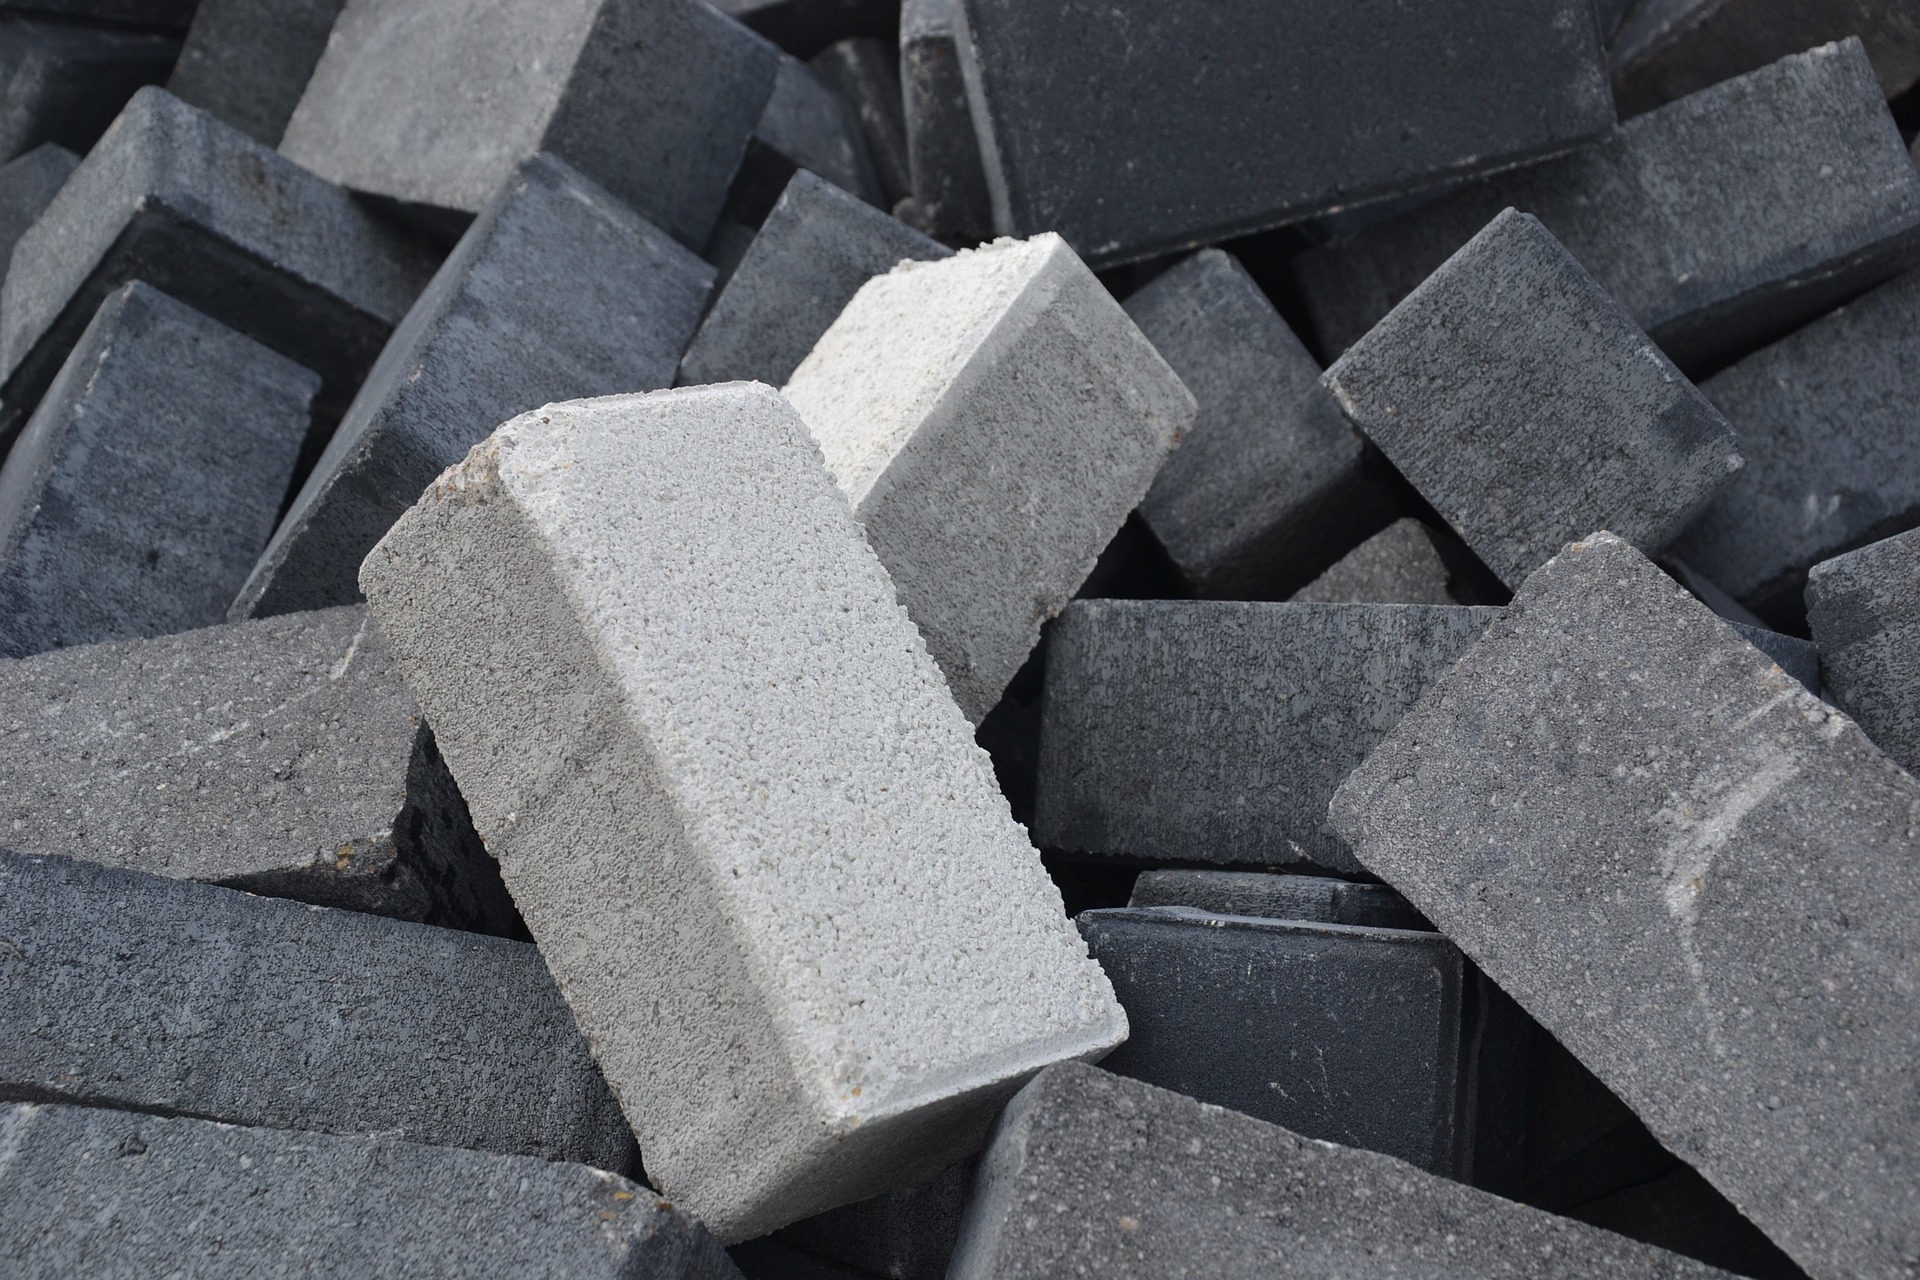 Bricks of concrete, which can be made stronger with recycled PPE